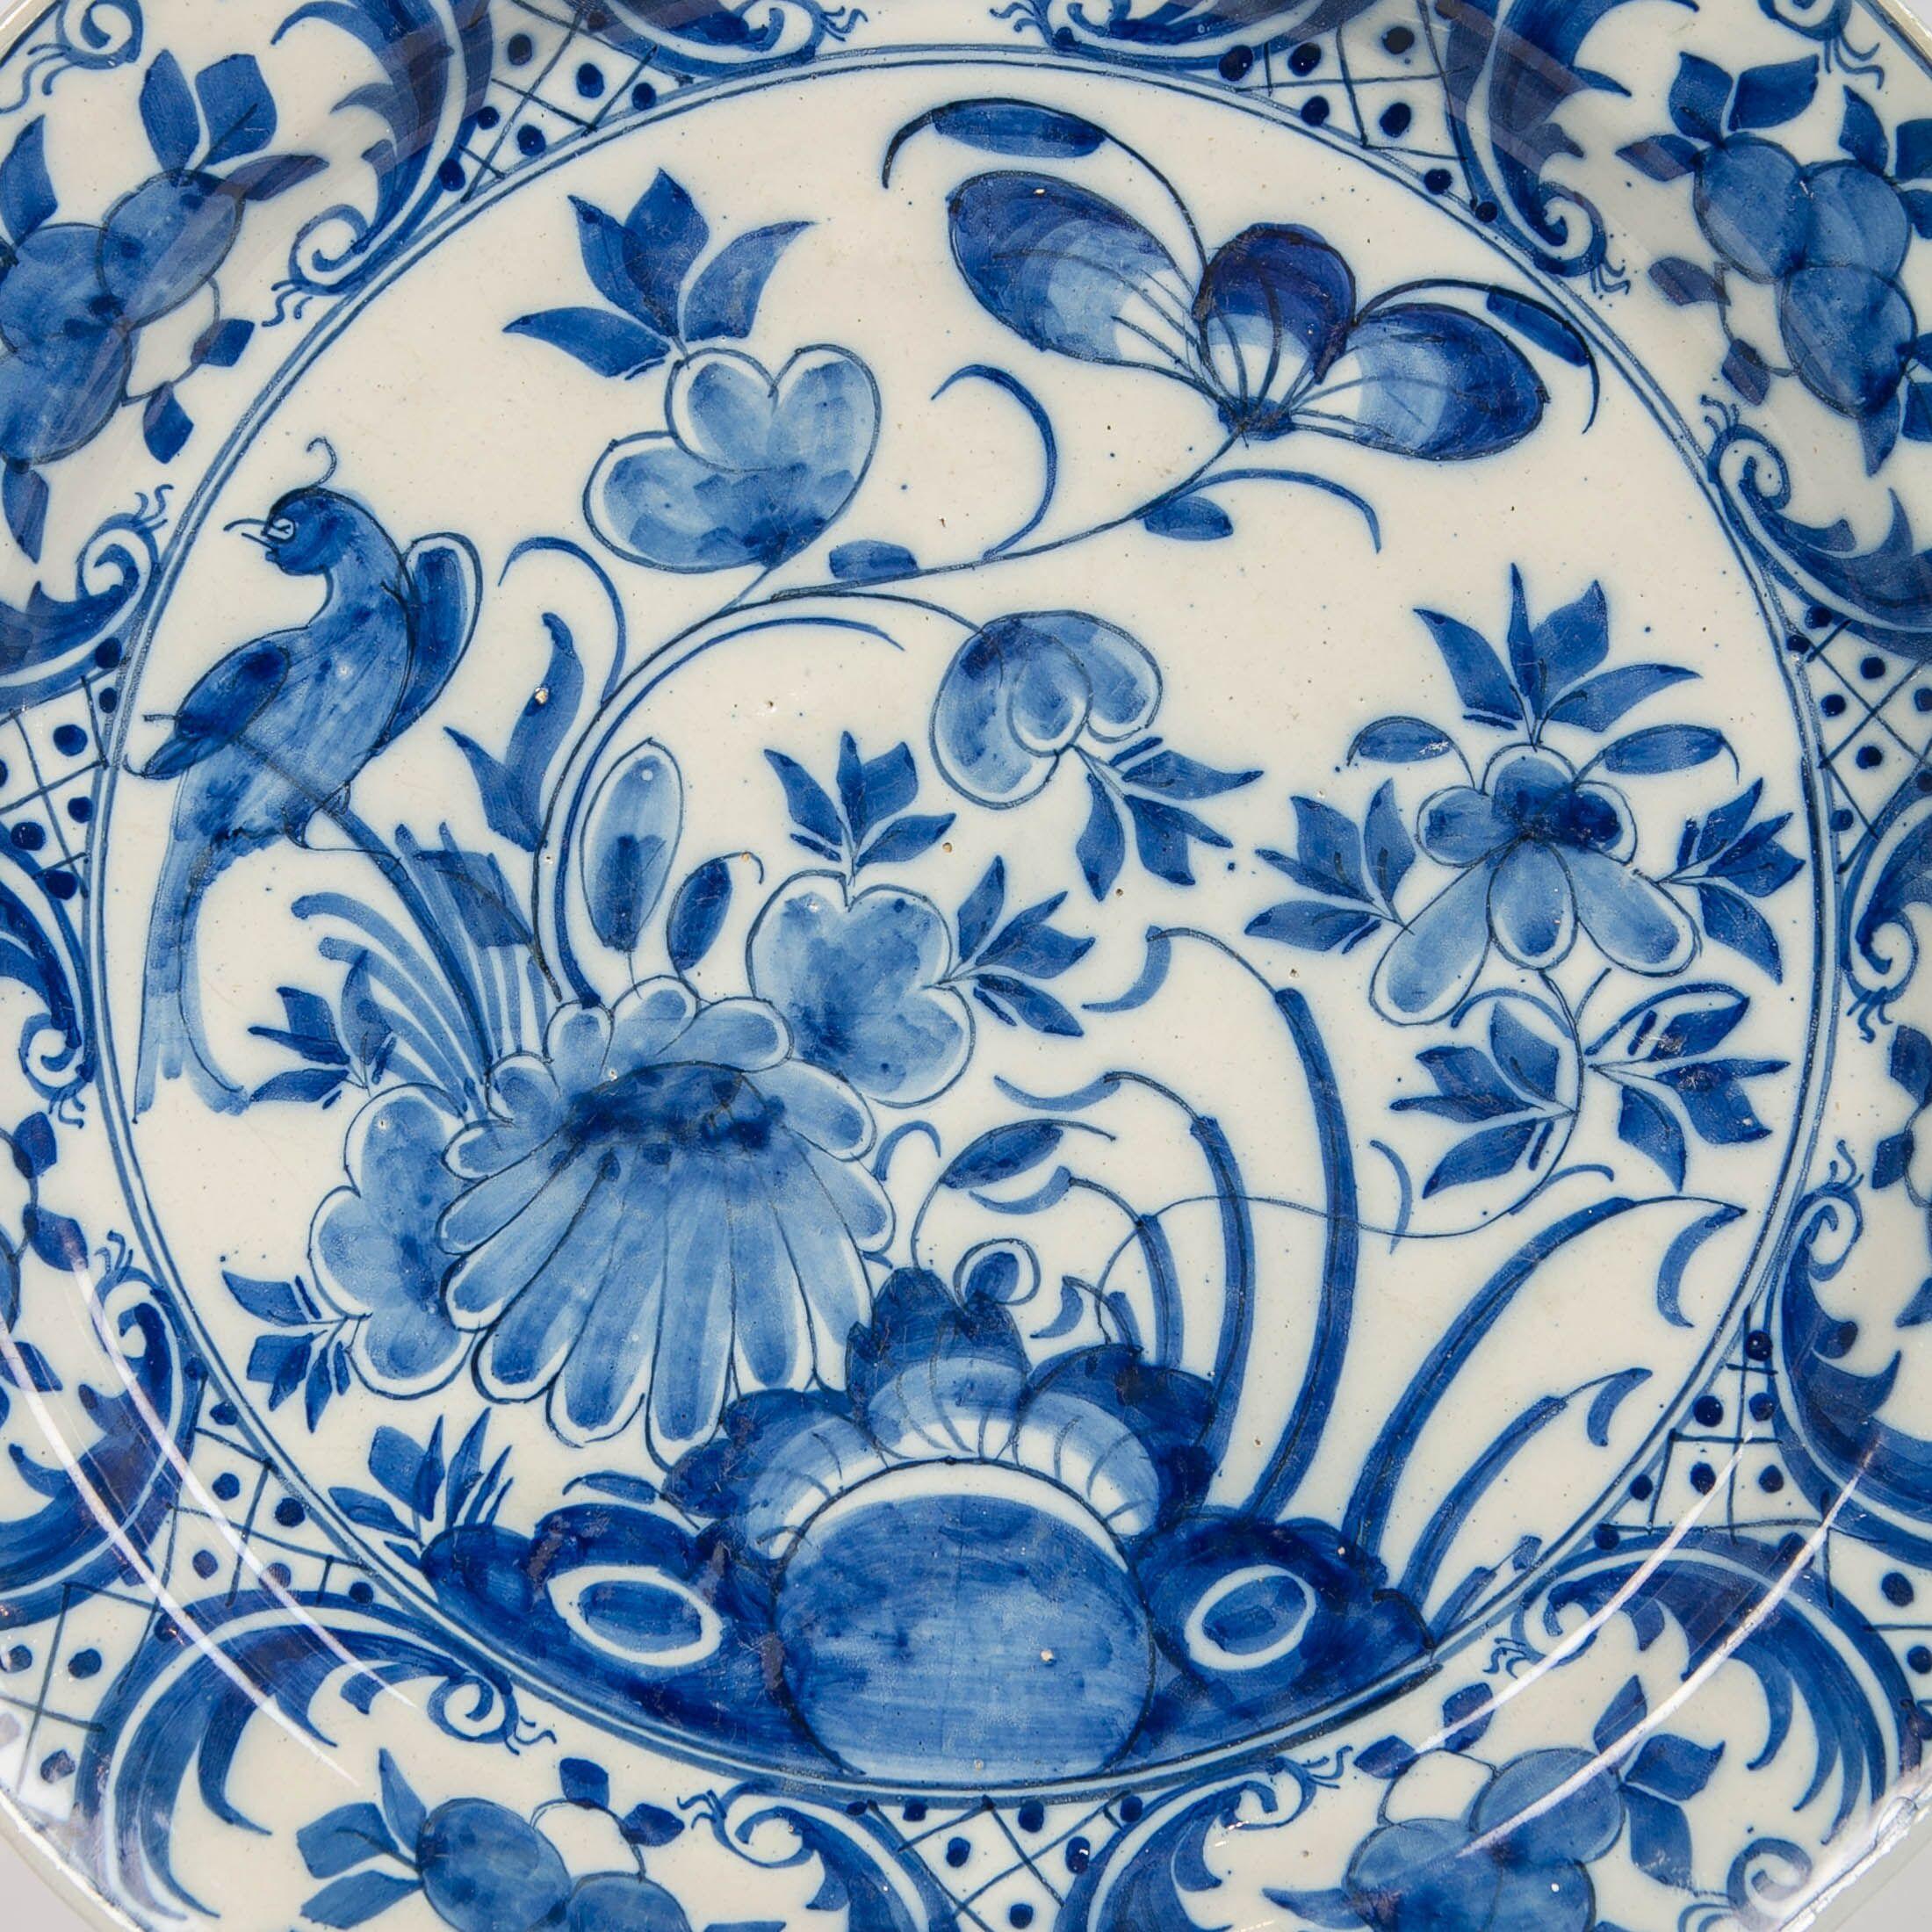 Late 18th Century Pair of Dutch Delft Blue and White Chargers with Songbirds Made circa 1770